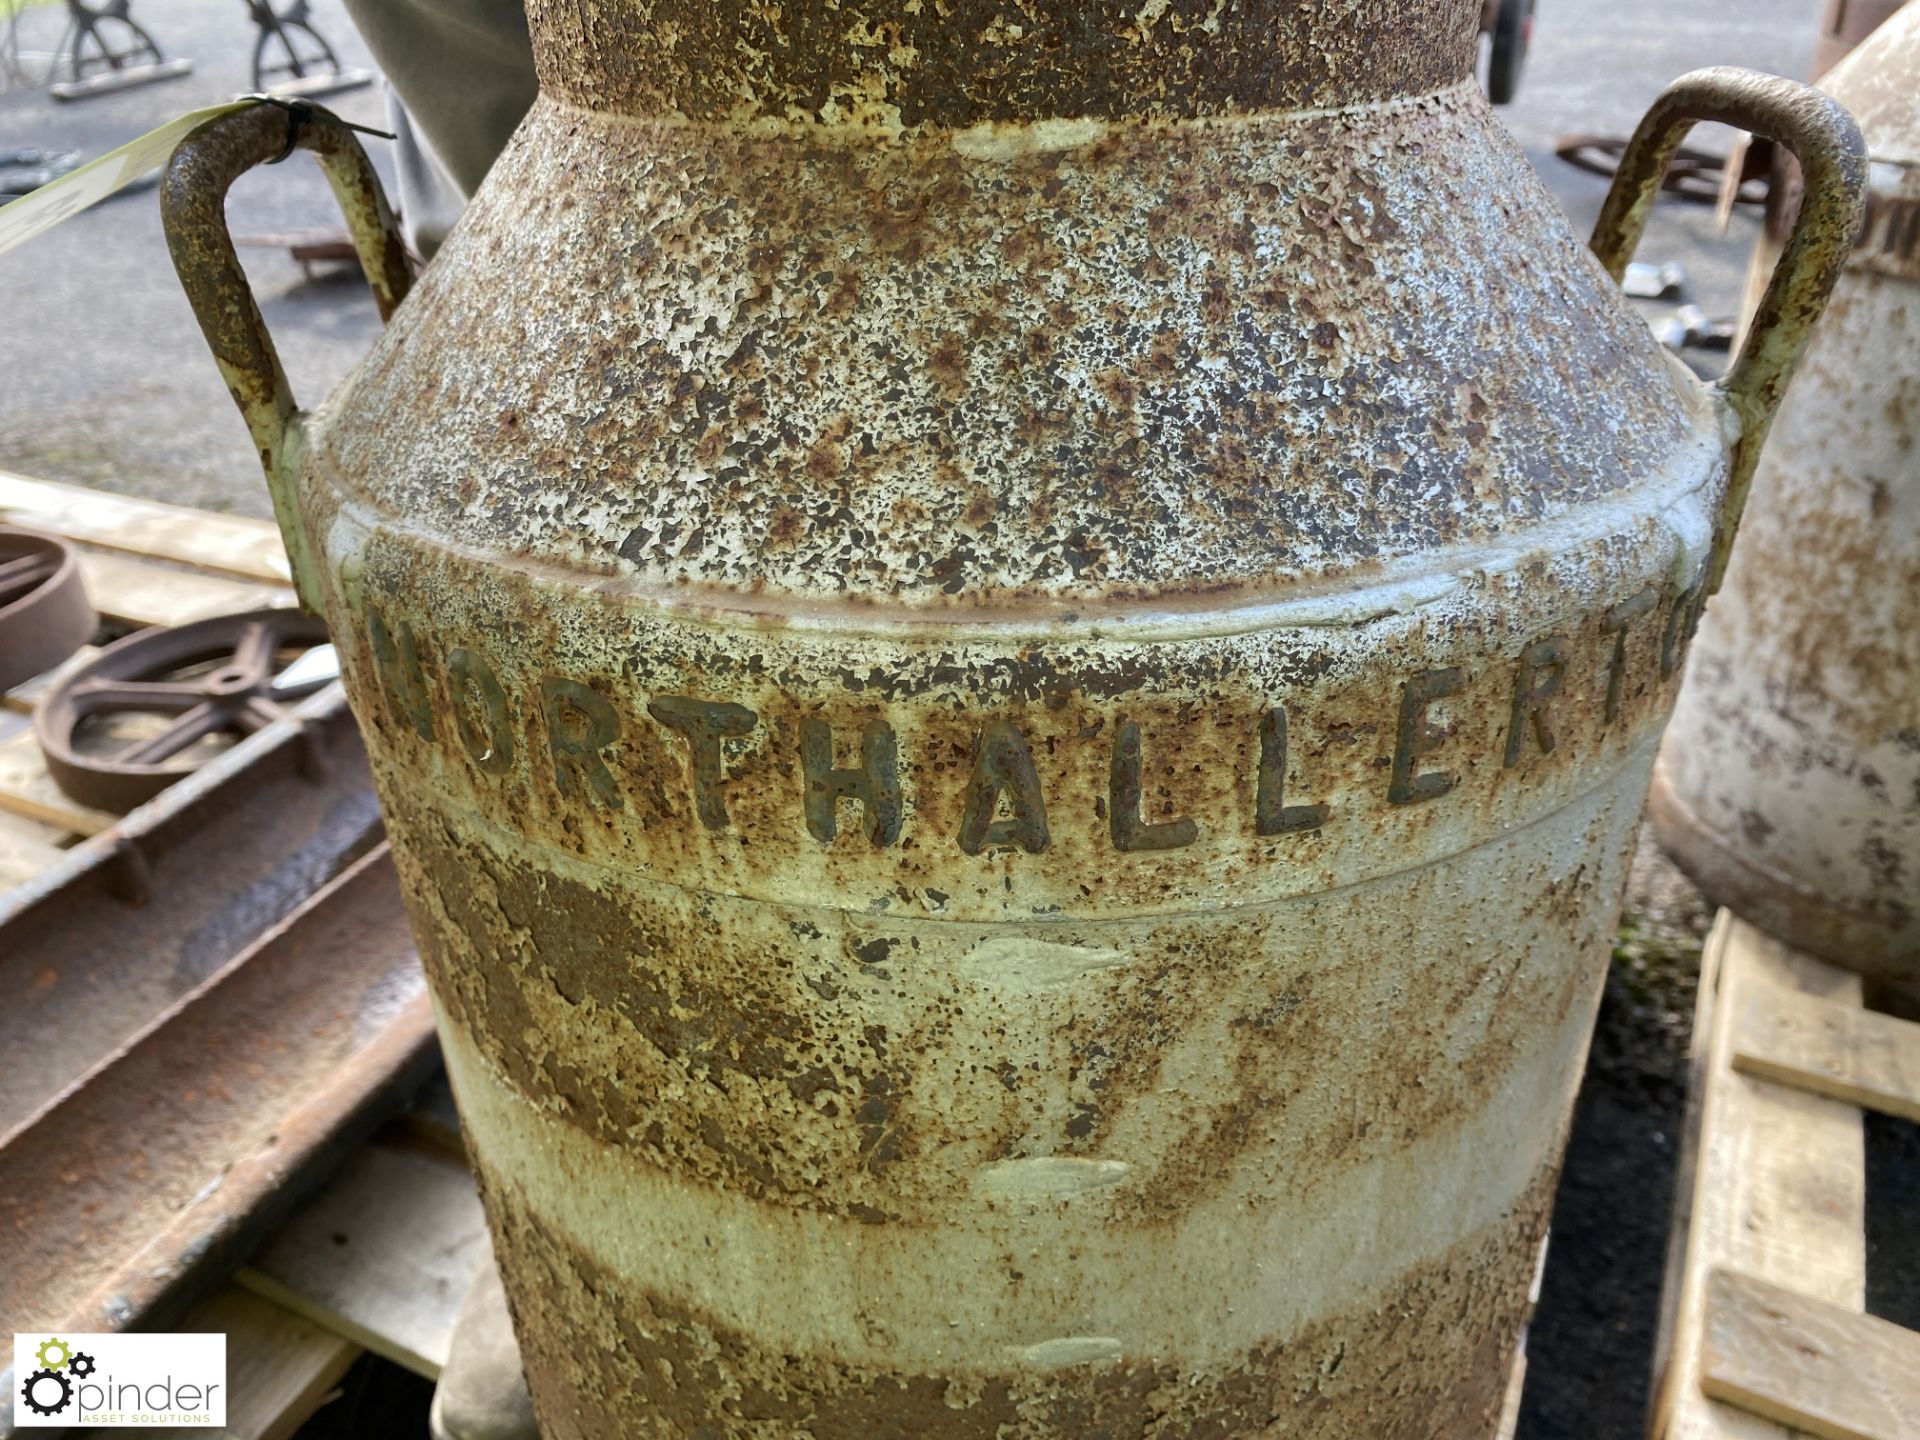 Milk Churn and Lid “Dried Milk Products, Northallerton” - Image 4 of 6